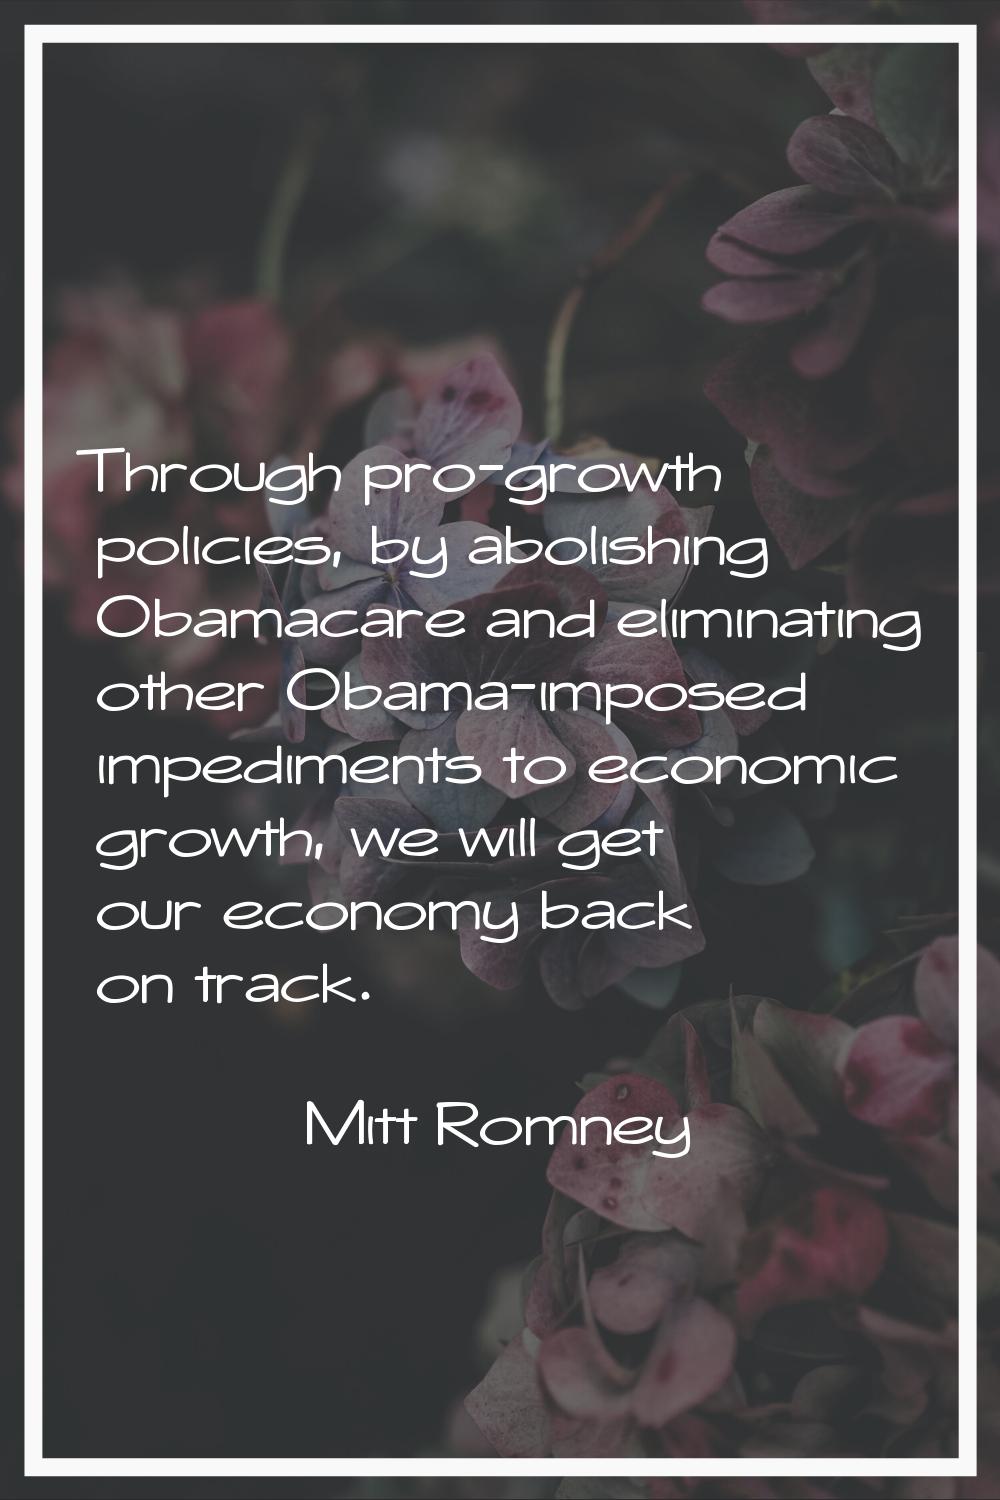 Through pro-growth policies, by abolishing Obamacare and eliminating other Obama-imposed impediment